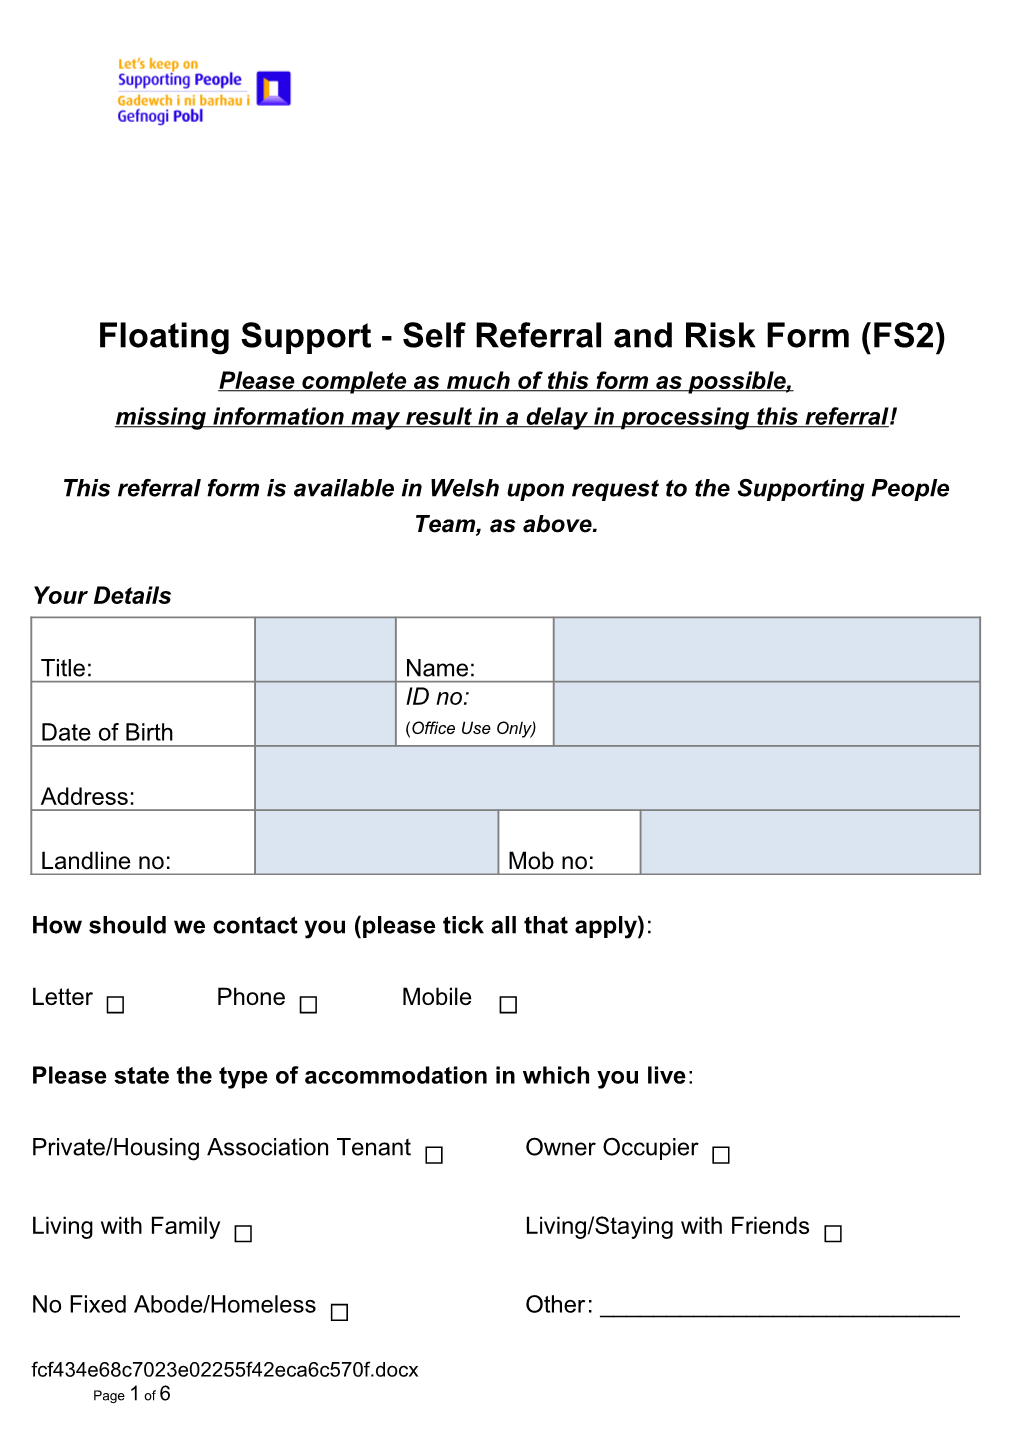 Floating Support S2 Self Referral and Risk Form April 2016